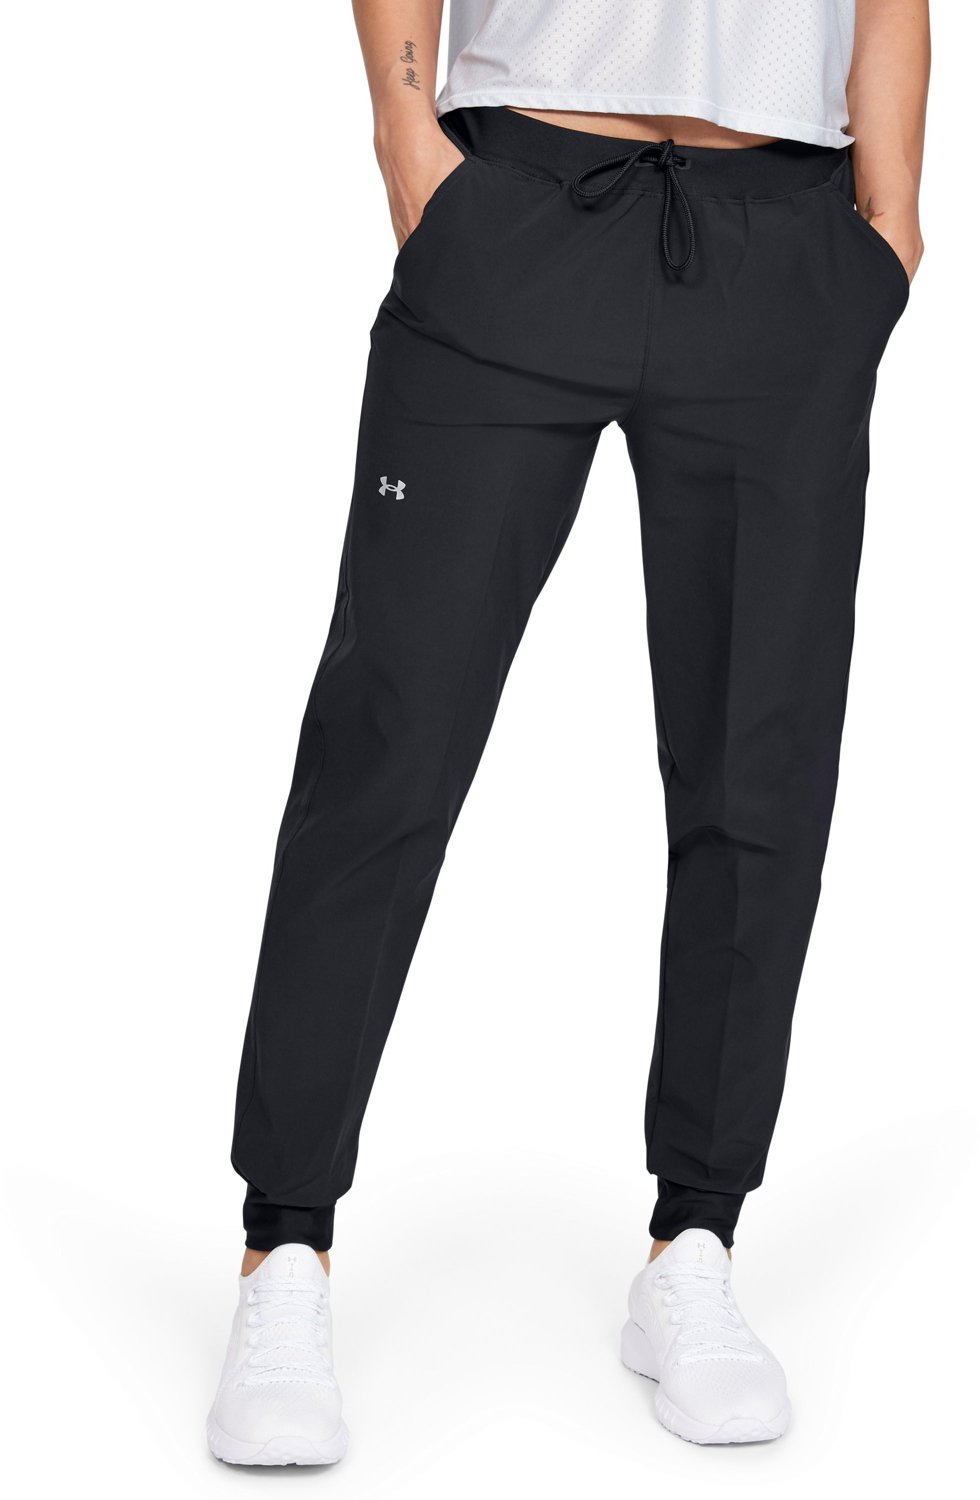 Polyester Exercise Pants Under armour for Women for sale